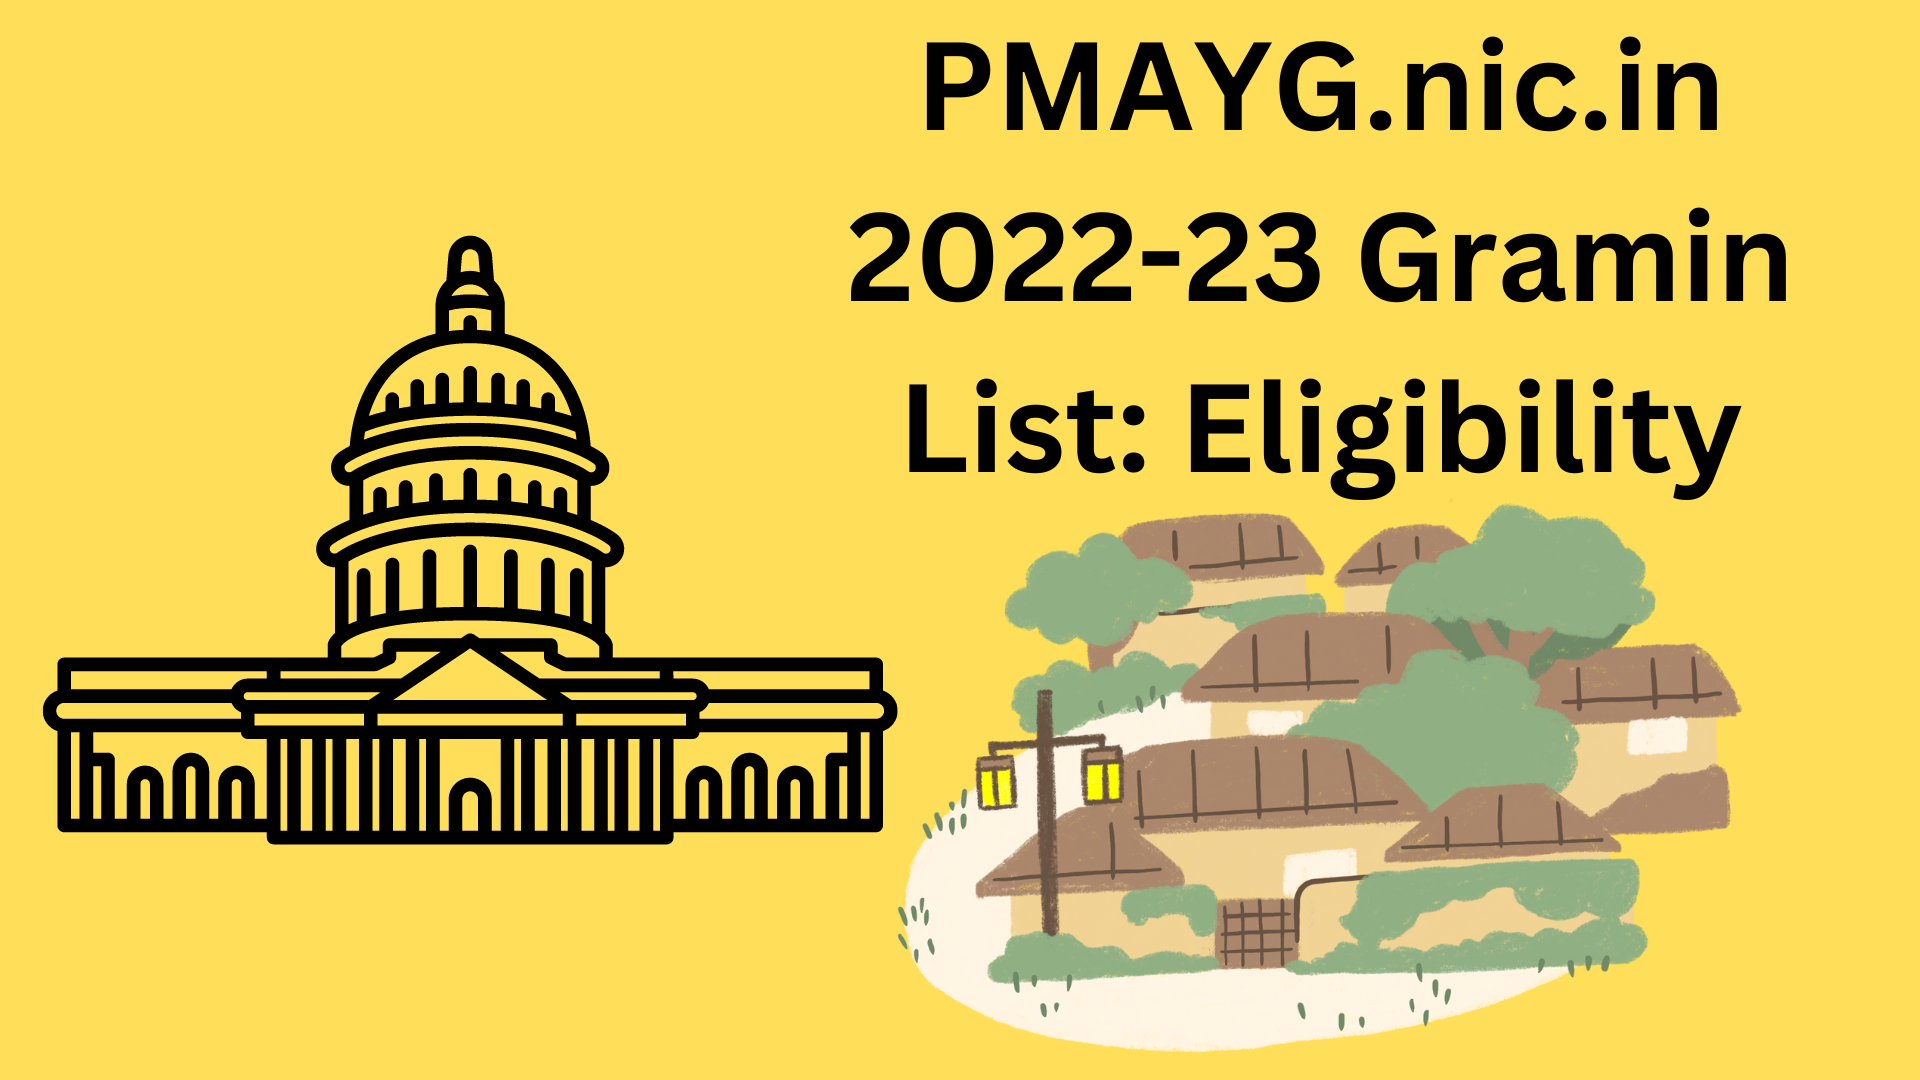 PMAYG.nic.in 2022-23 Gramin List: Eligibility, Benefits, and How to Check